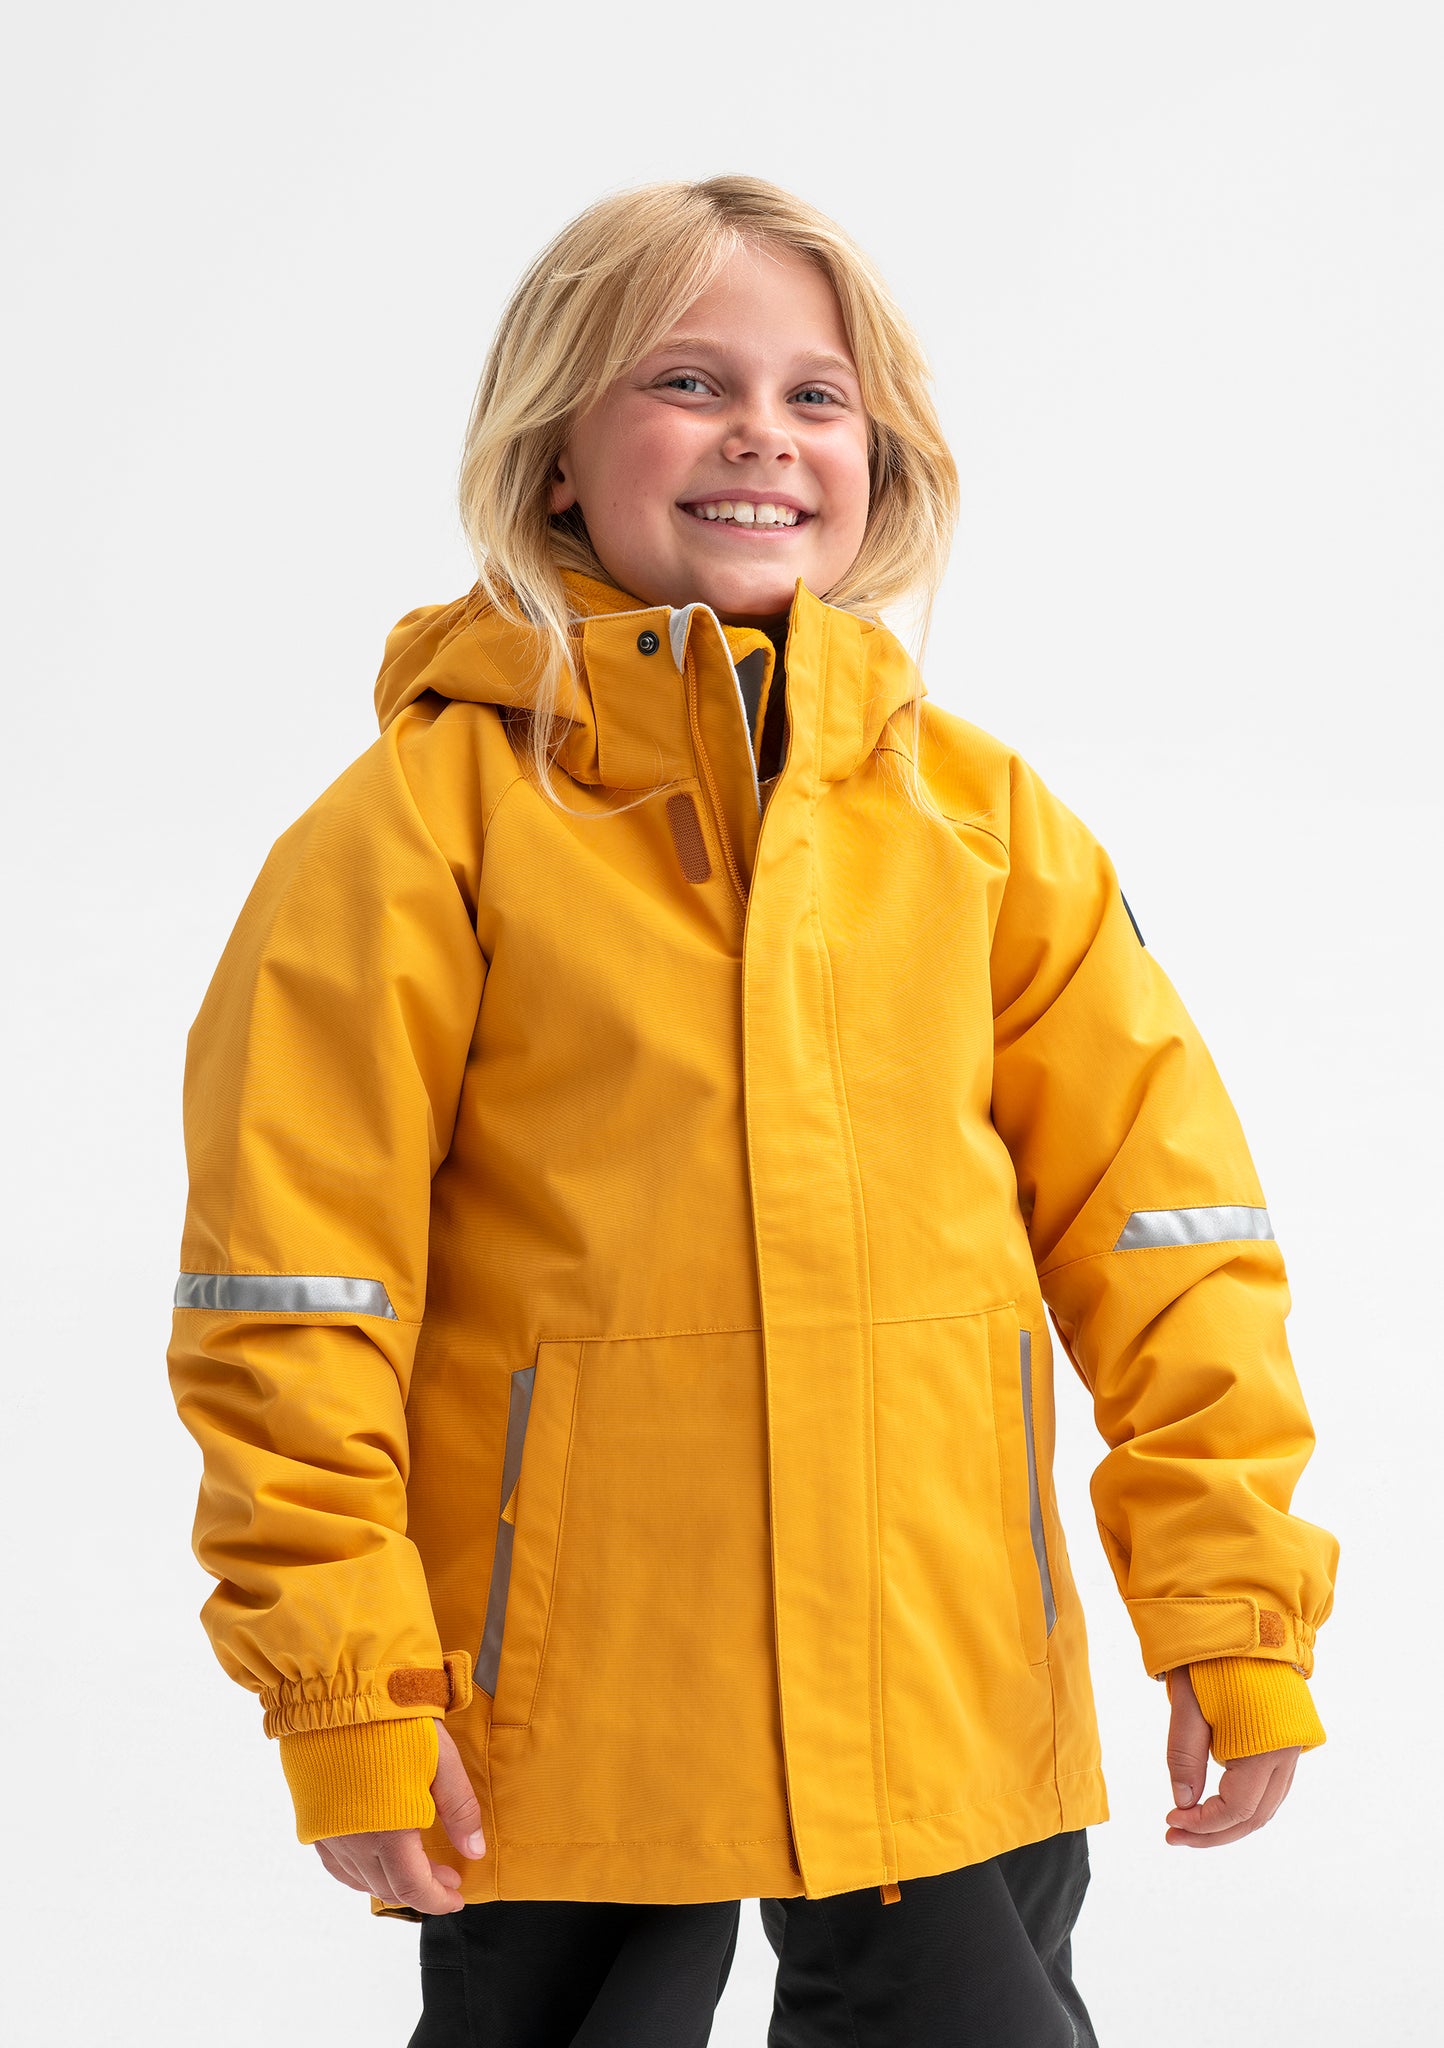 A young girl wearing a yellow waterproof jacket for kids, includes a detachable hood, front pockets and reflectors.